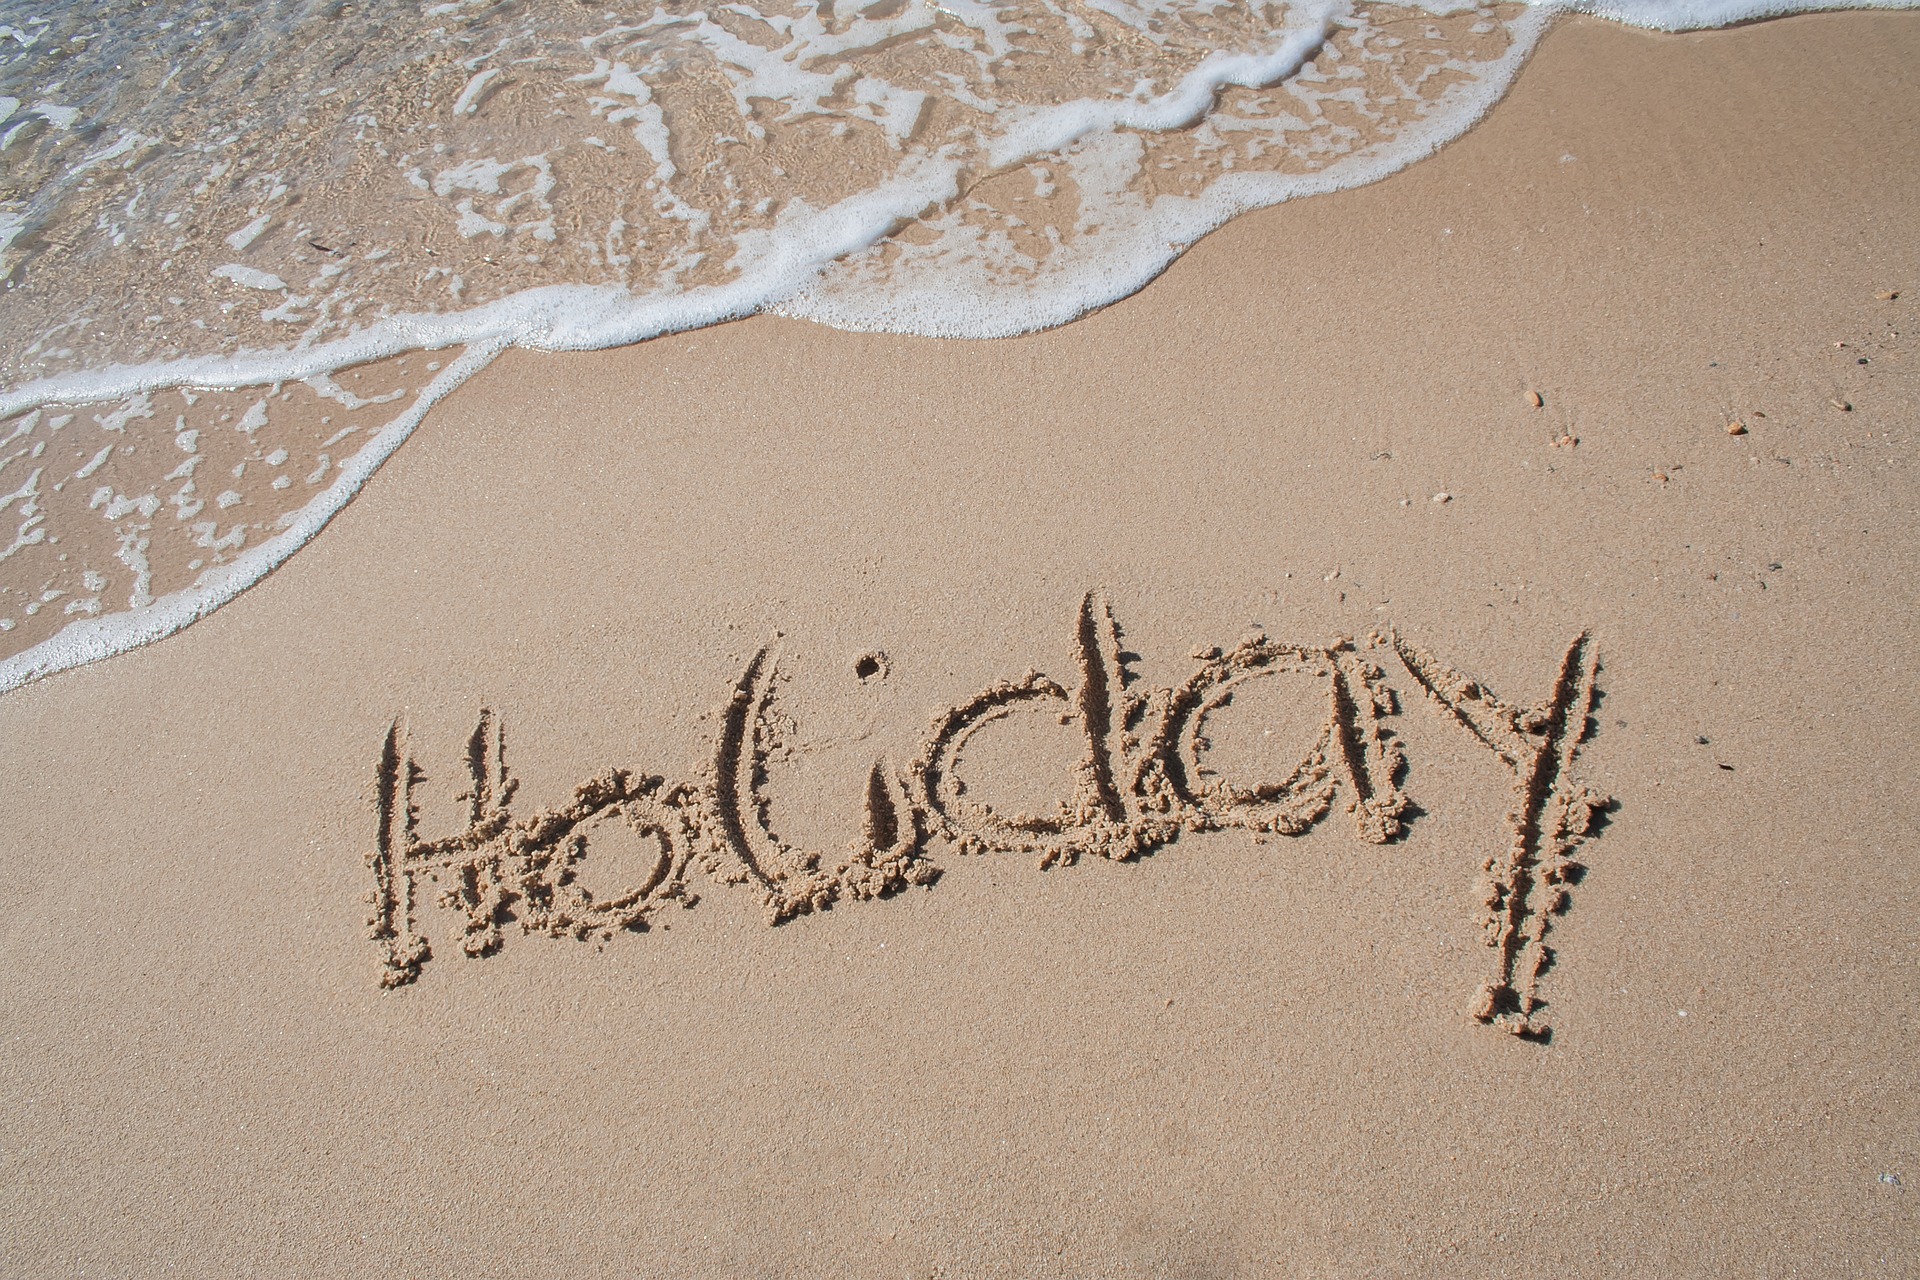 The words "Holiday" written in the sand on a beach.